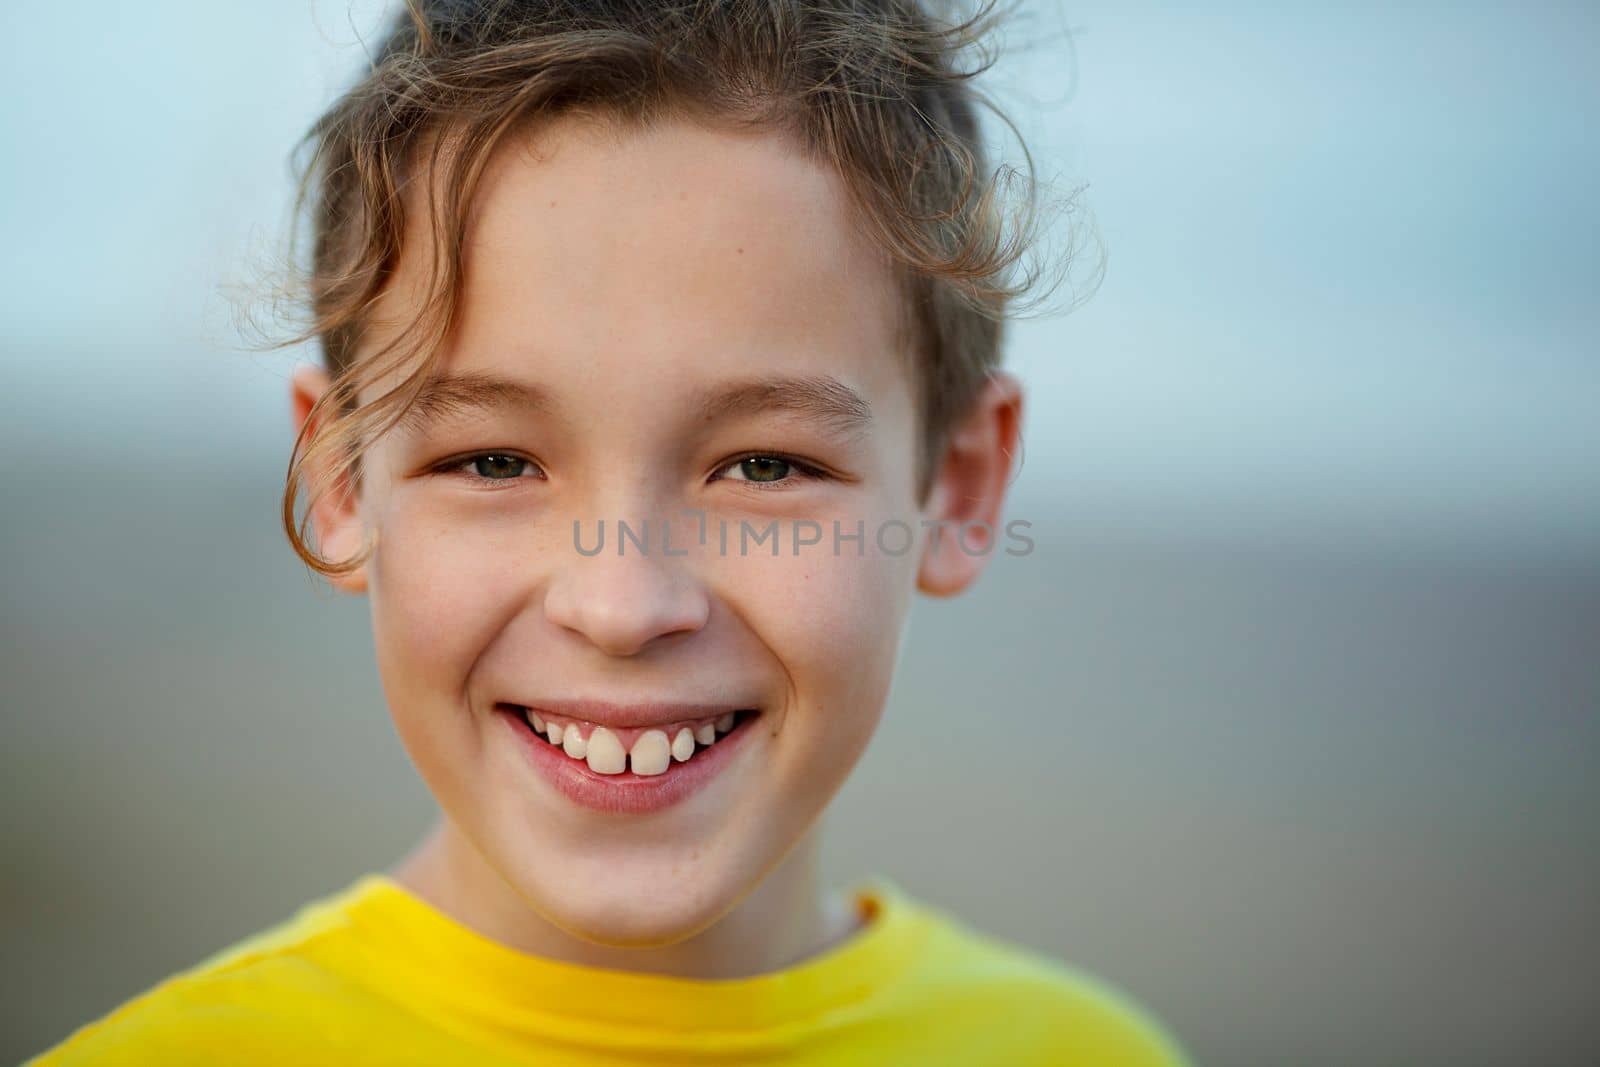 Close-up portrait of a cheerful boy with curly fair hair. Child with a big smile looking to the camera, blurry background